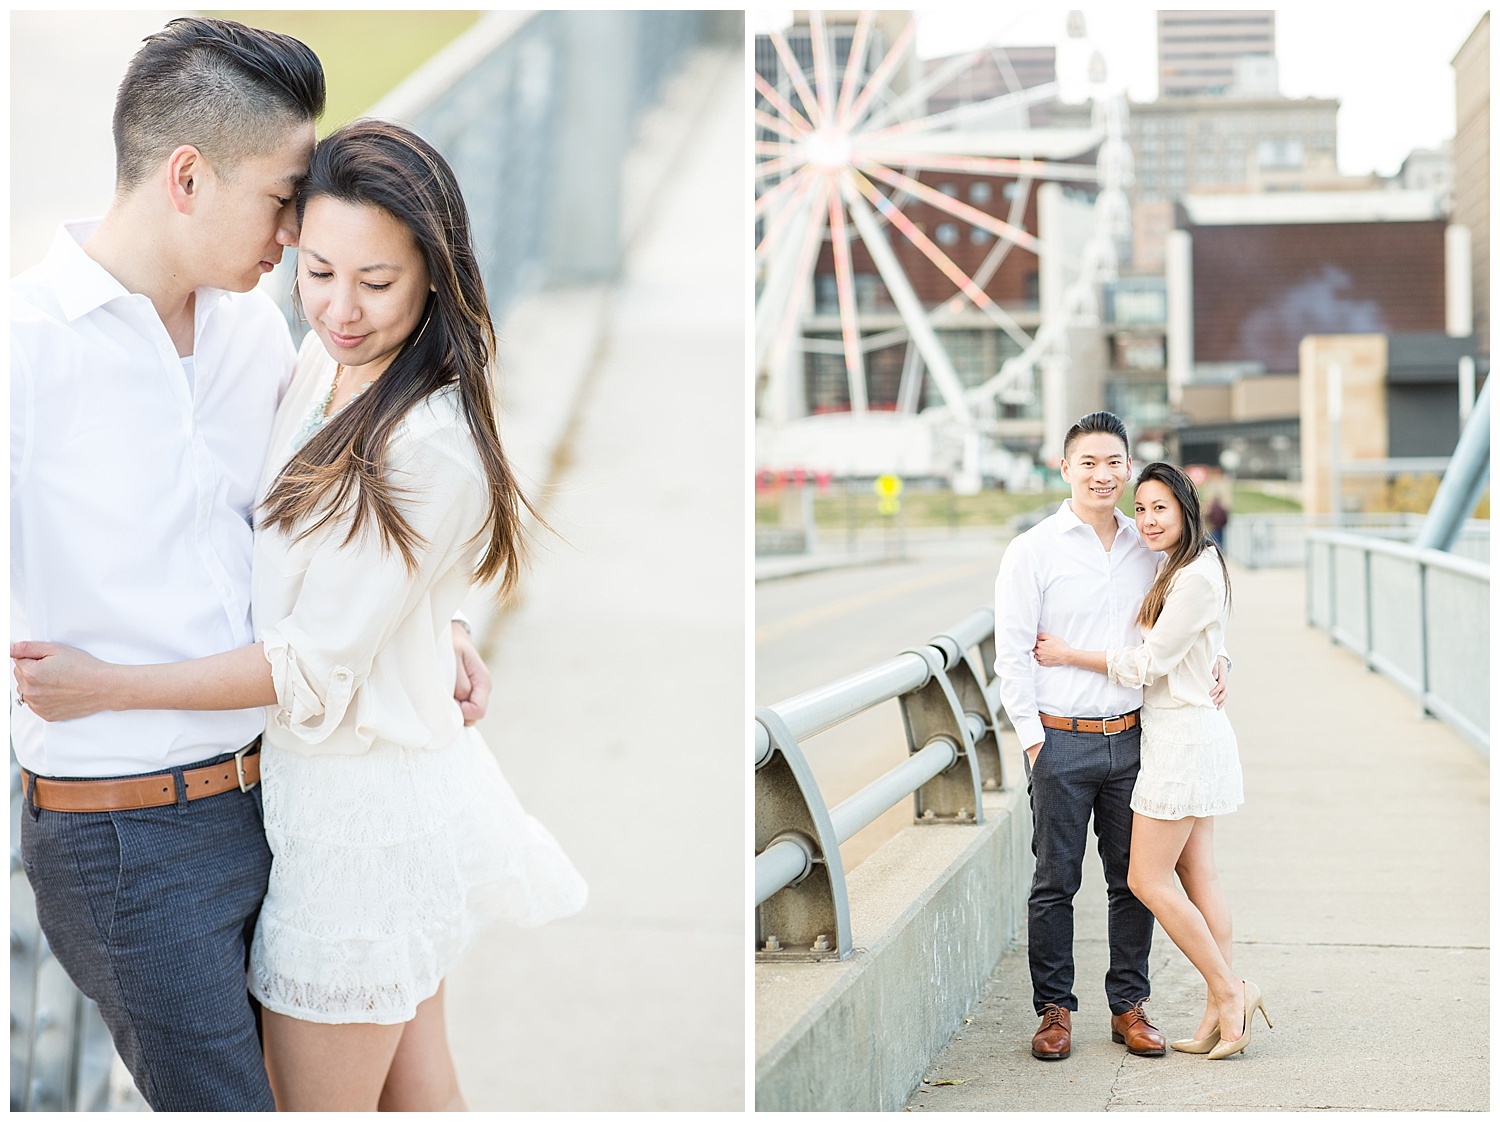 Downtown Cincinnati Engagement - What to Wear in Engagement Pictures